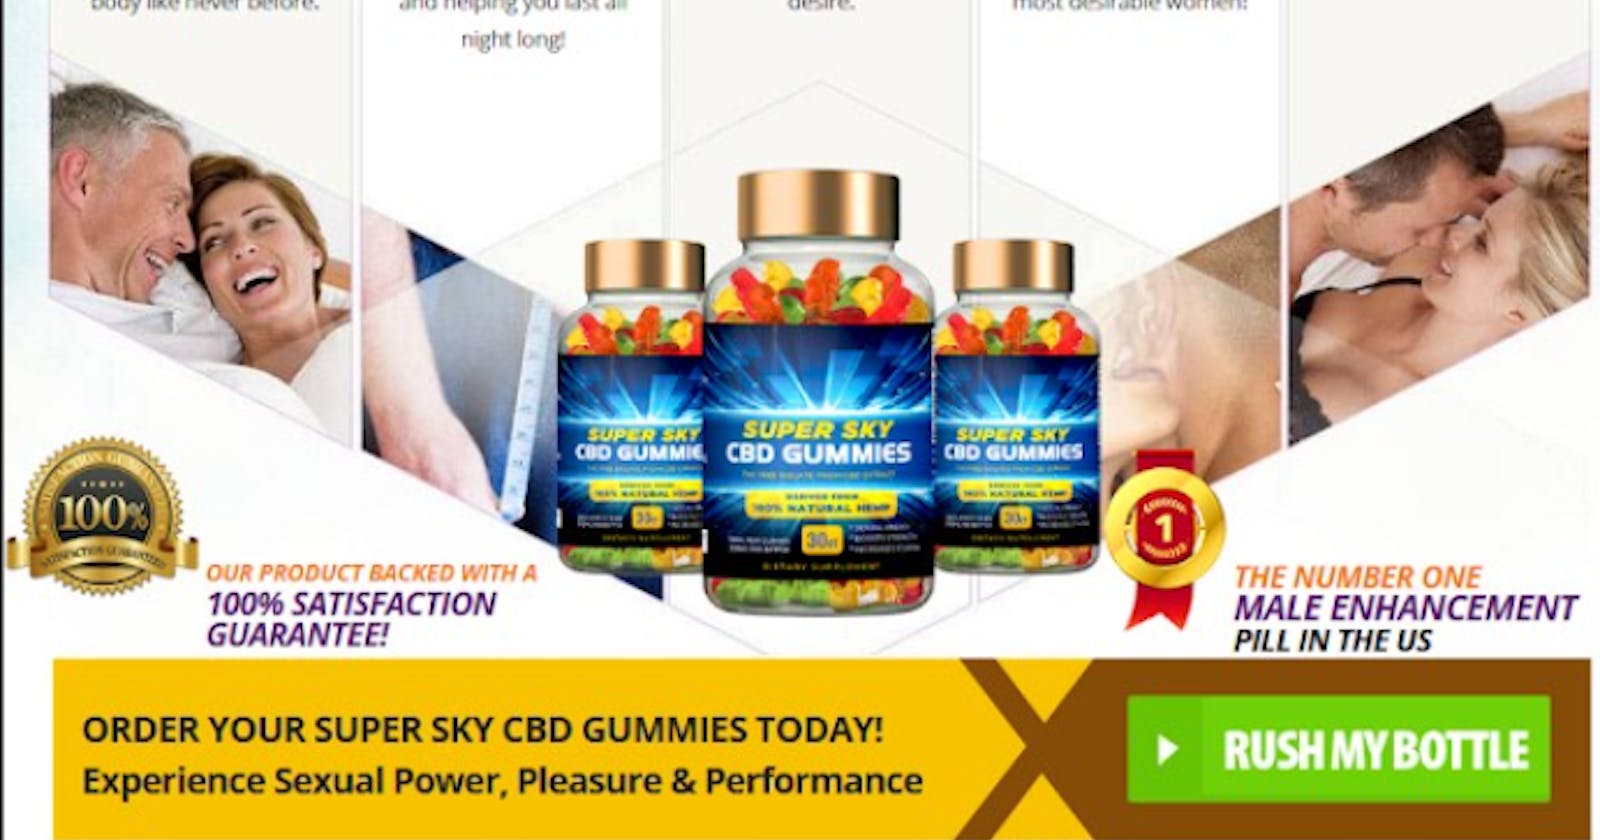 Super Sky CBD Gummies Male Enhancement [CHECK RESULTS?] Increases Libido & Staying Power?